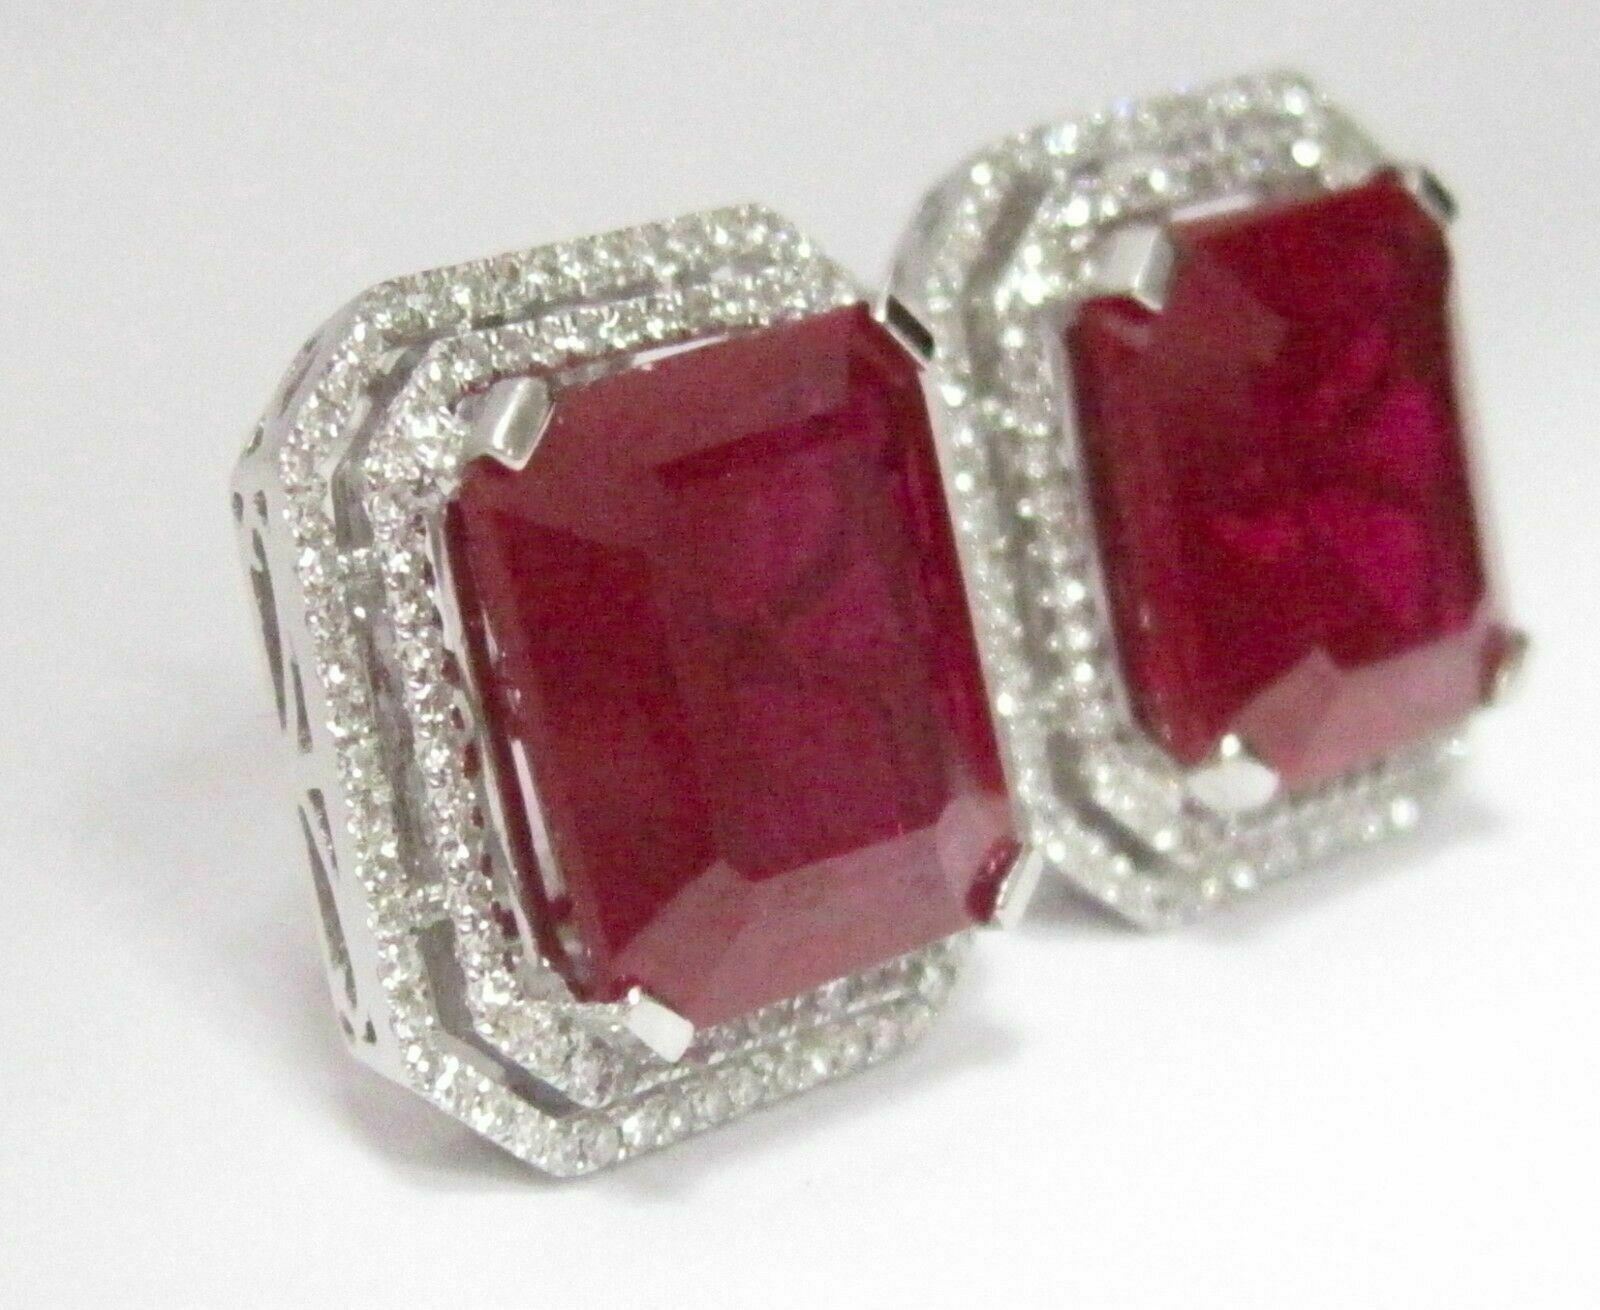 24.02 TCW Radiant Red Ruby & Diamond Accents Stud Earrings 18k White Gold